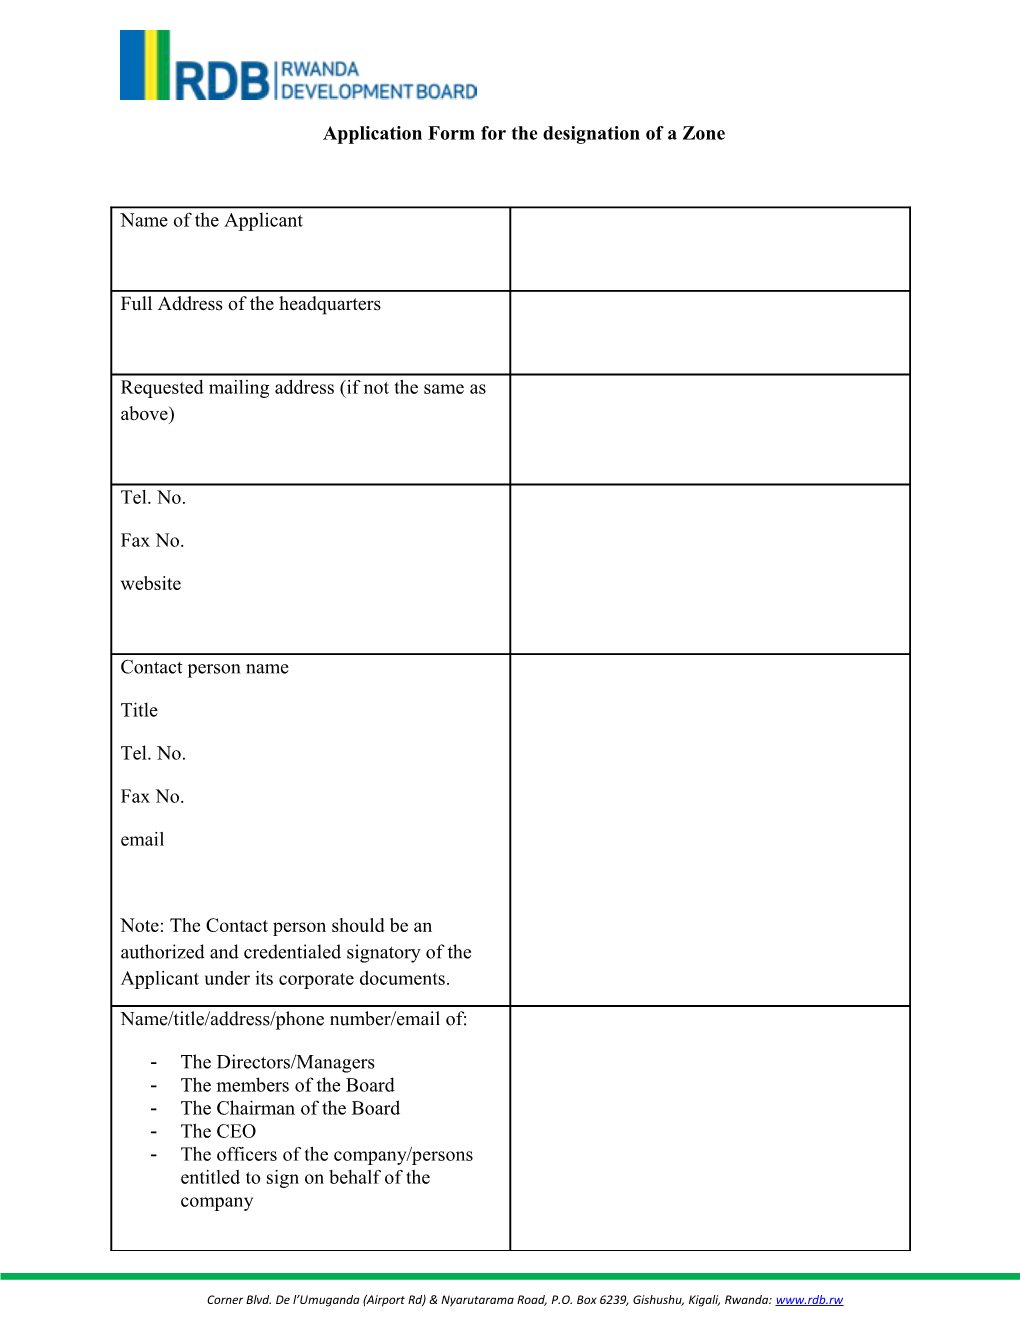 Application Form for the Designation of a Zone